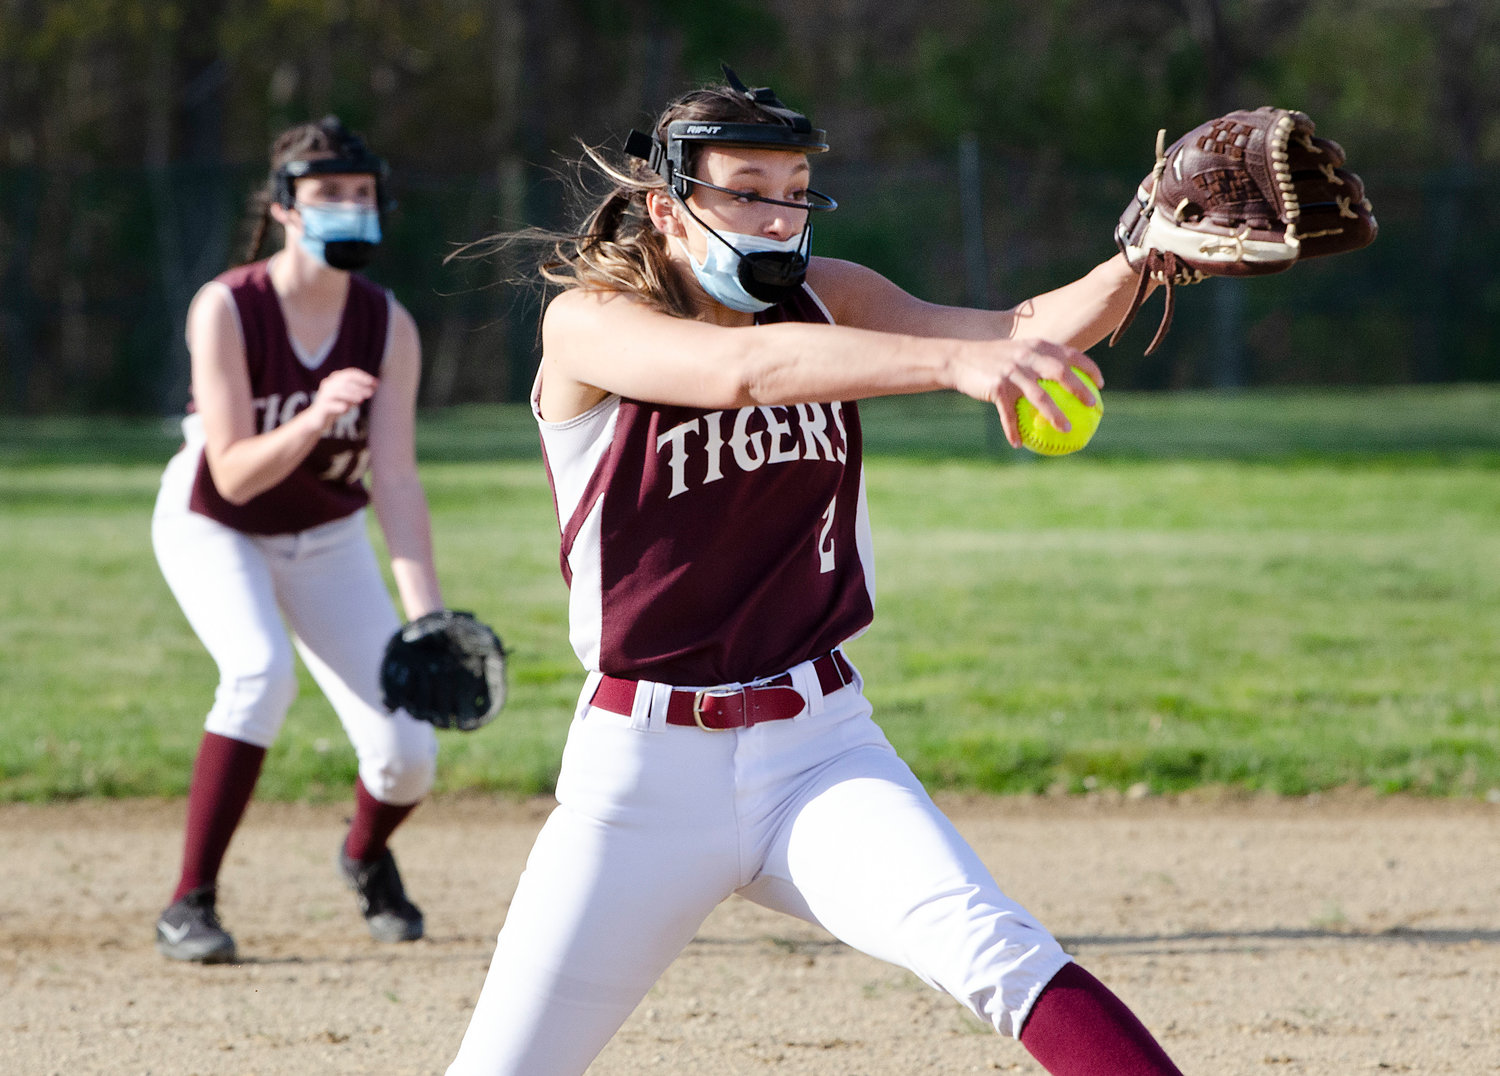 Tigers pitcher Grace Plourde winds up to throw a pitch in the second inning. Plourde shined for Tiverton as she struck out 10 in seven innings with just 2 earned runs.